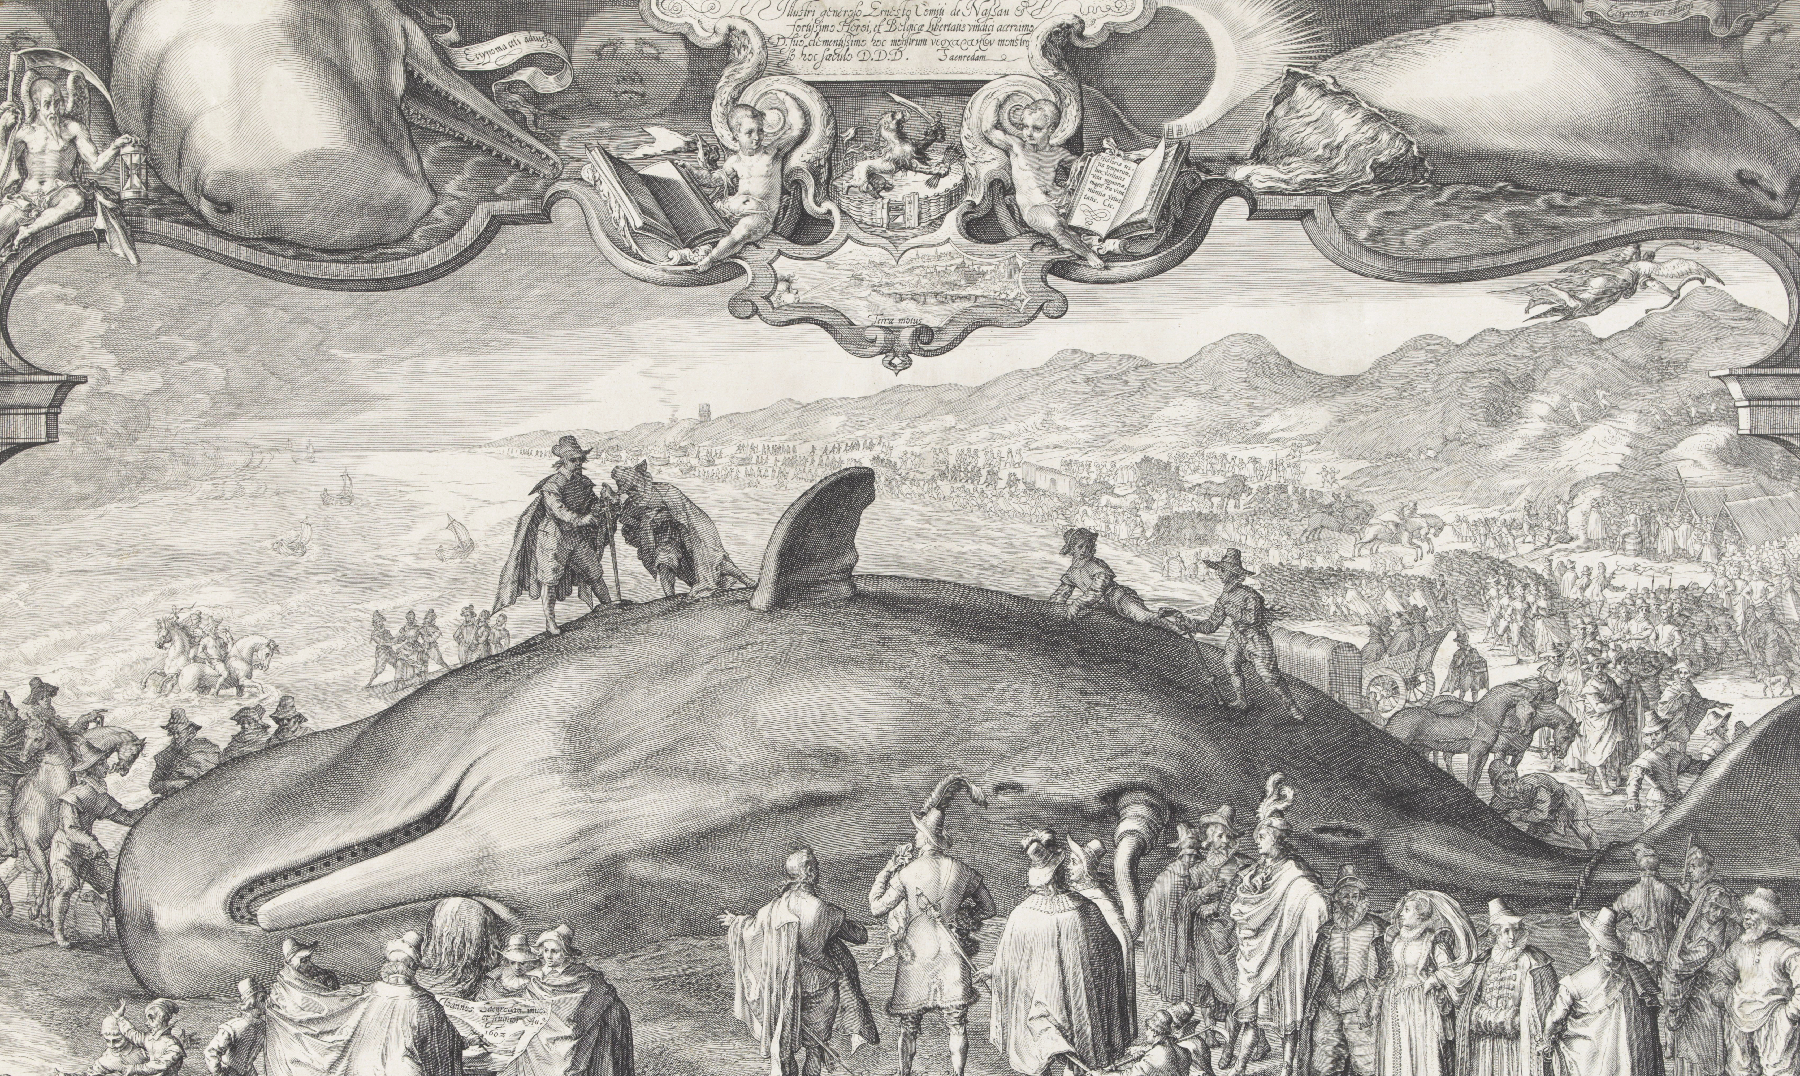 What can visual art teach us about scent, stench, and the mysterious substance known as ambergris? Lizzie Marx follows a “whale-trail” across hist